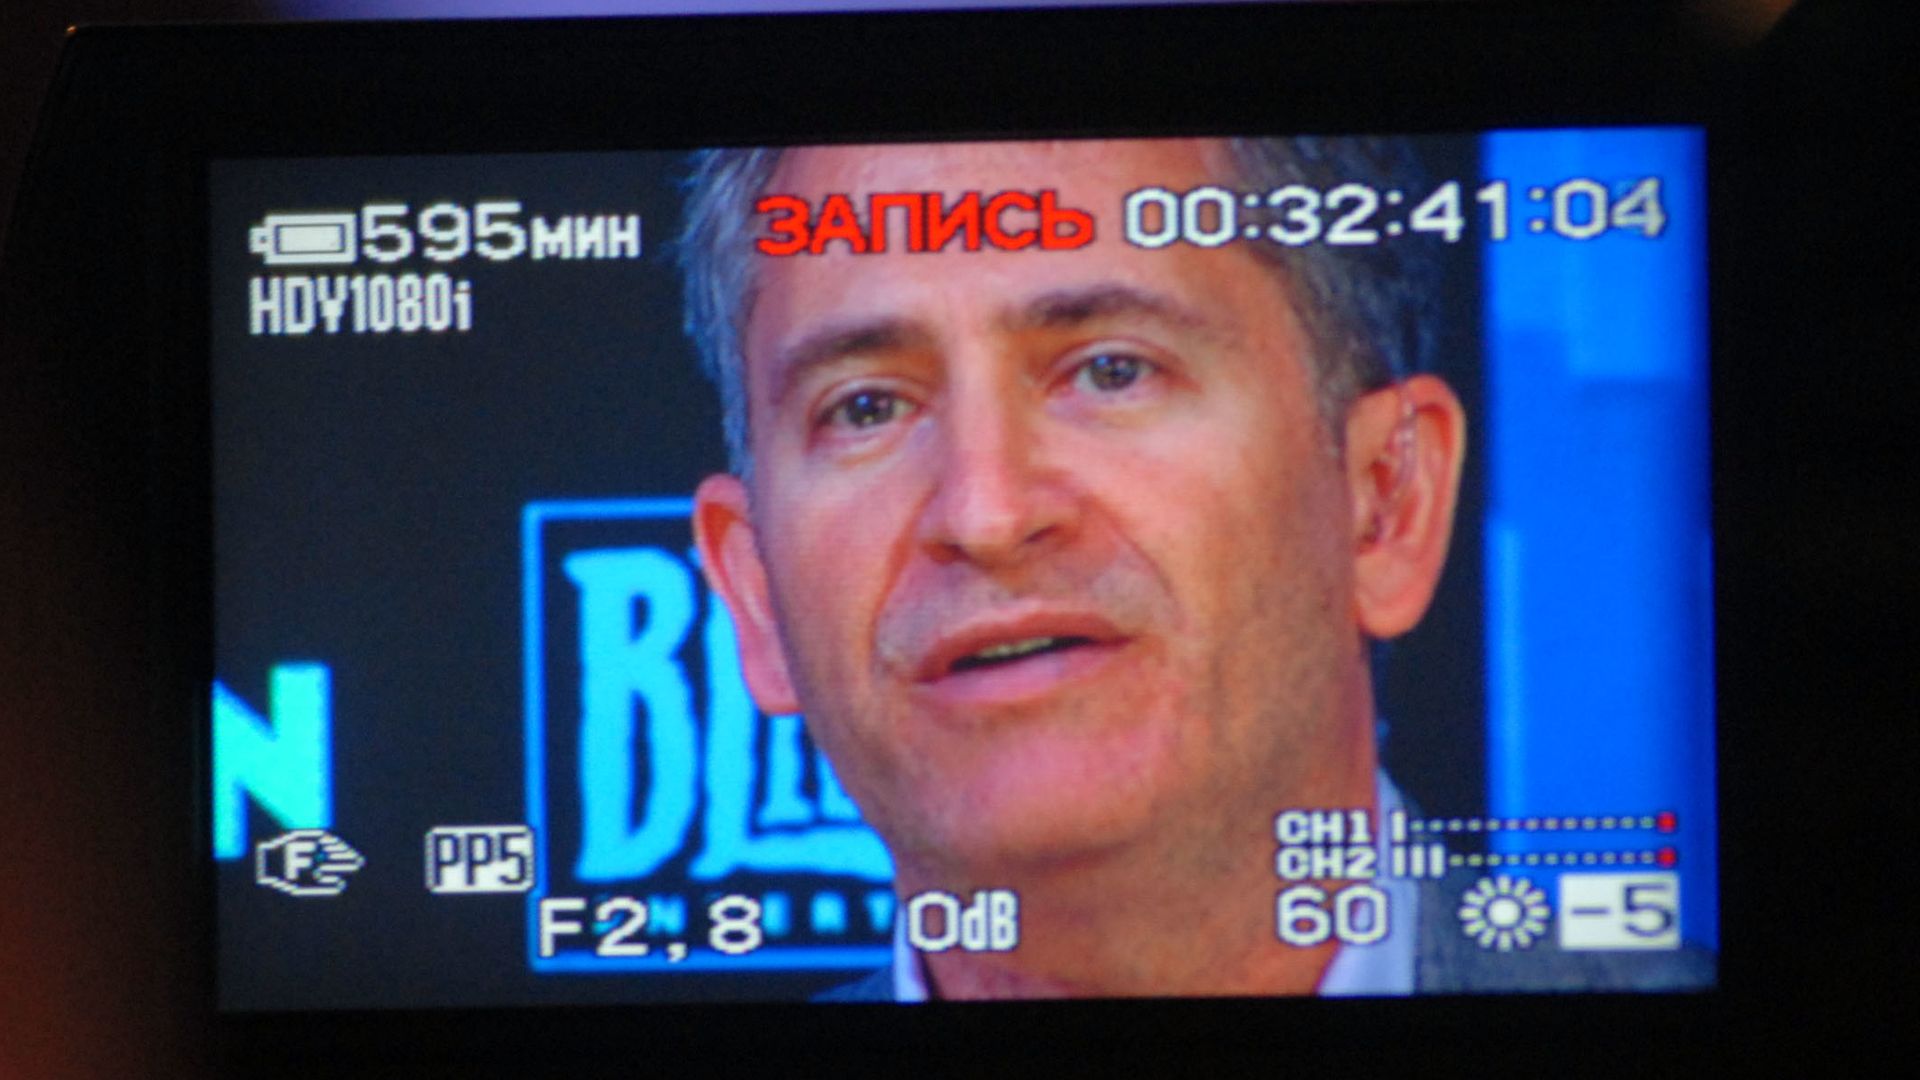 Photograph of a man speaking, as he is seen through the viewfinder of a video camera